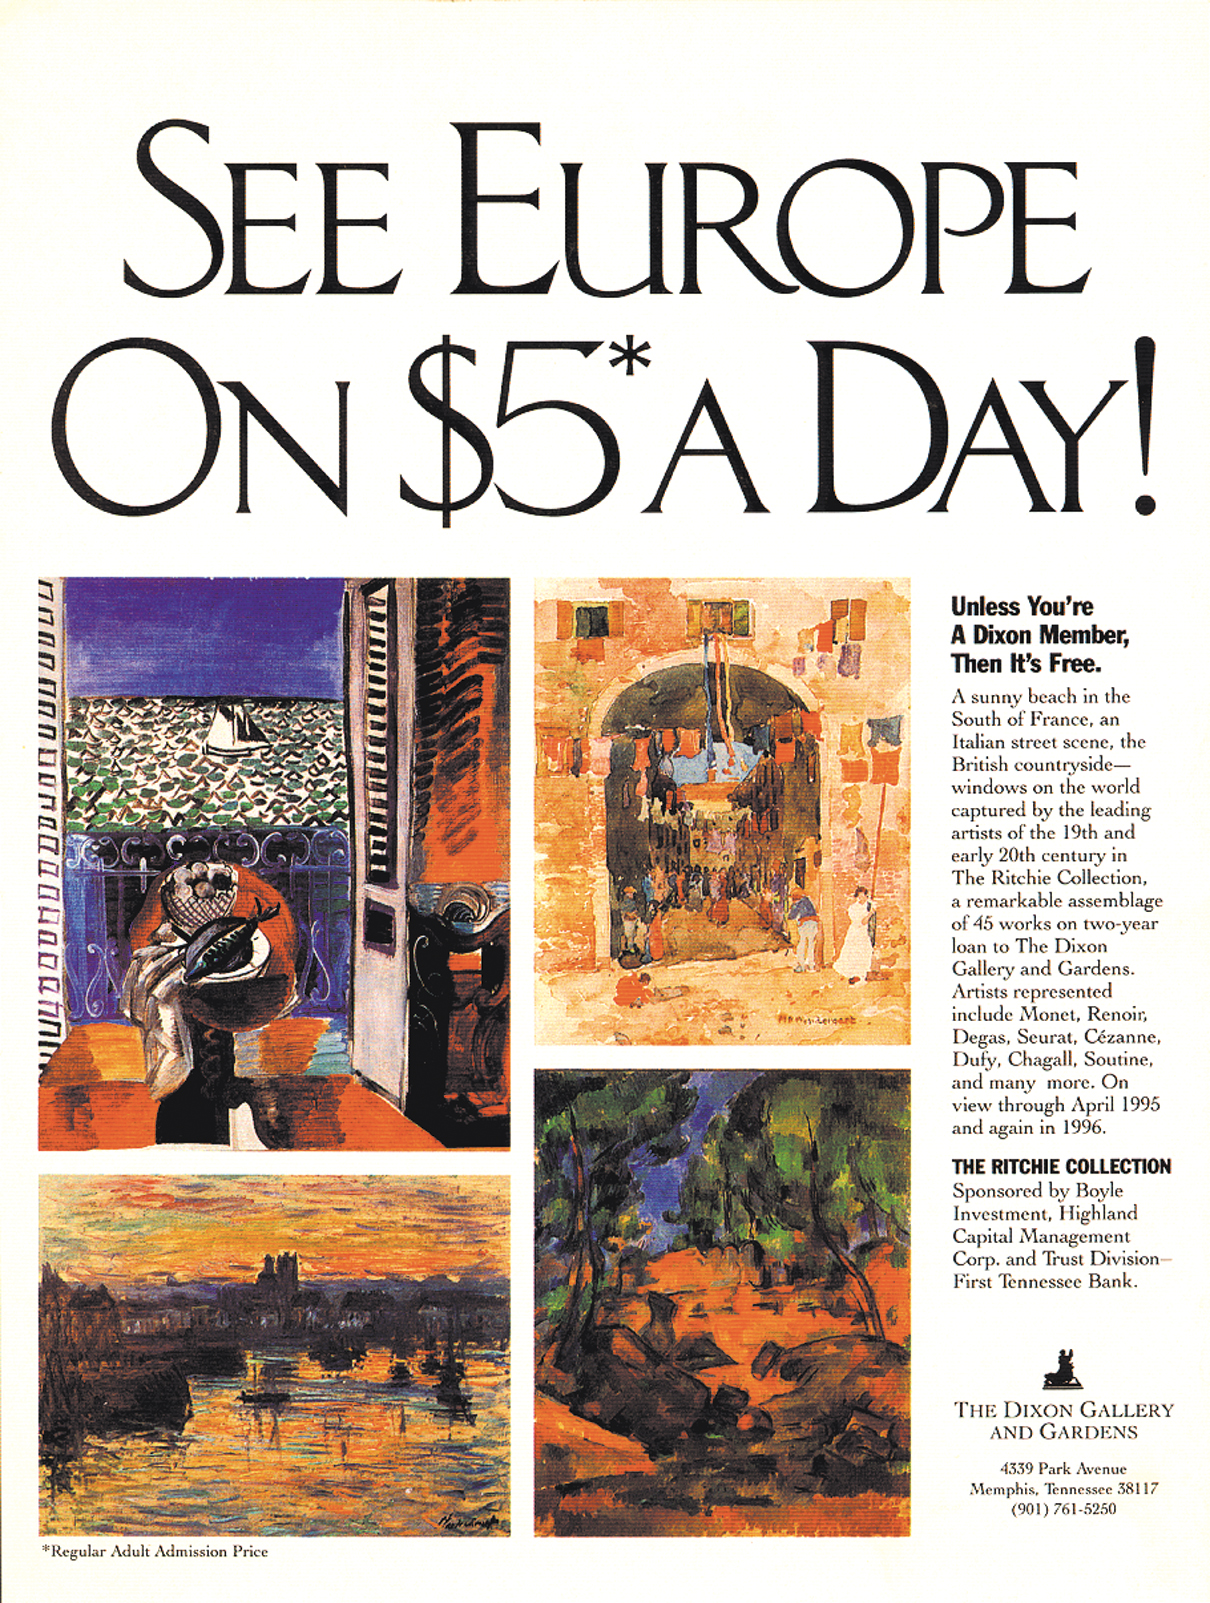  Dixon Gallery &amp; Gardens “See Europe on $5 a Day” print ad 